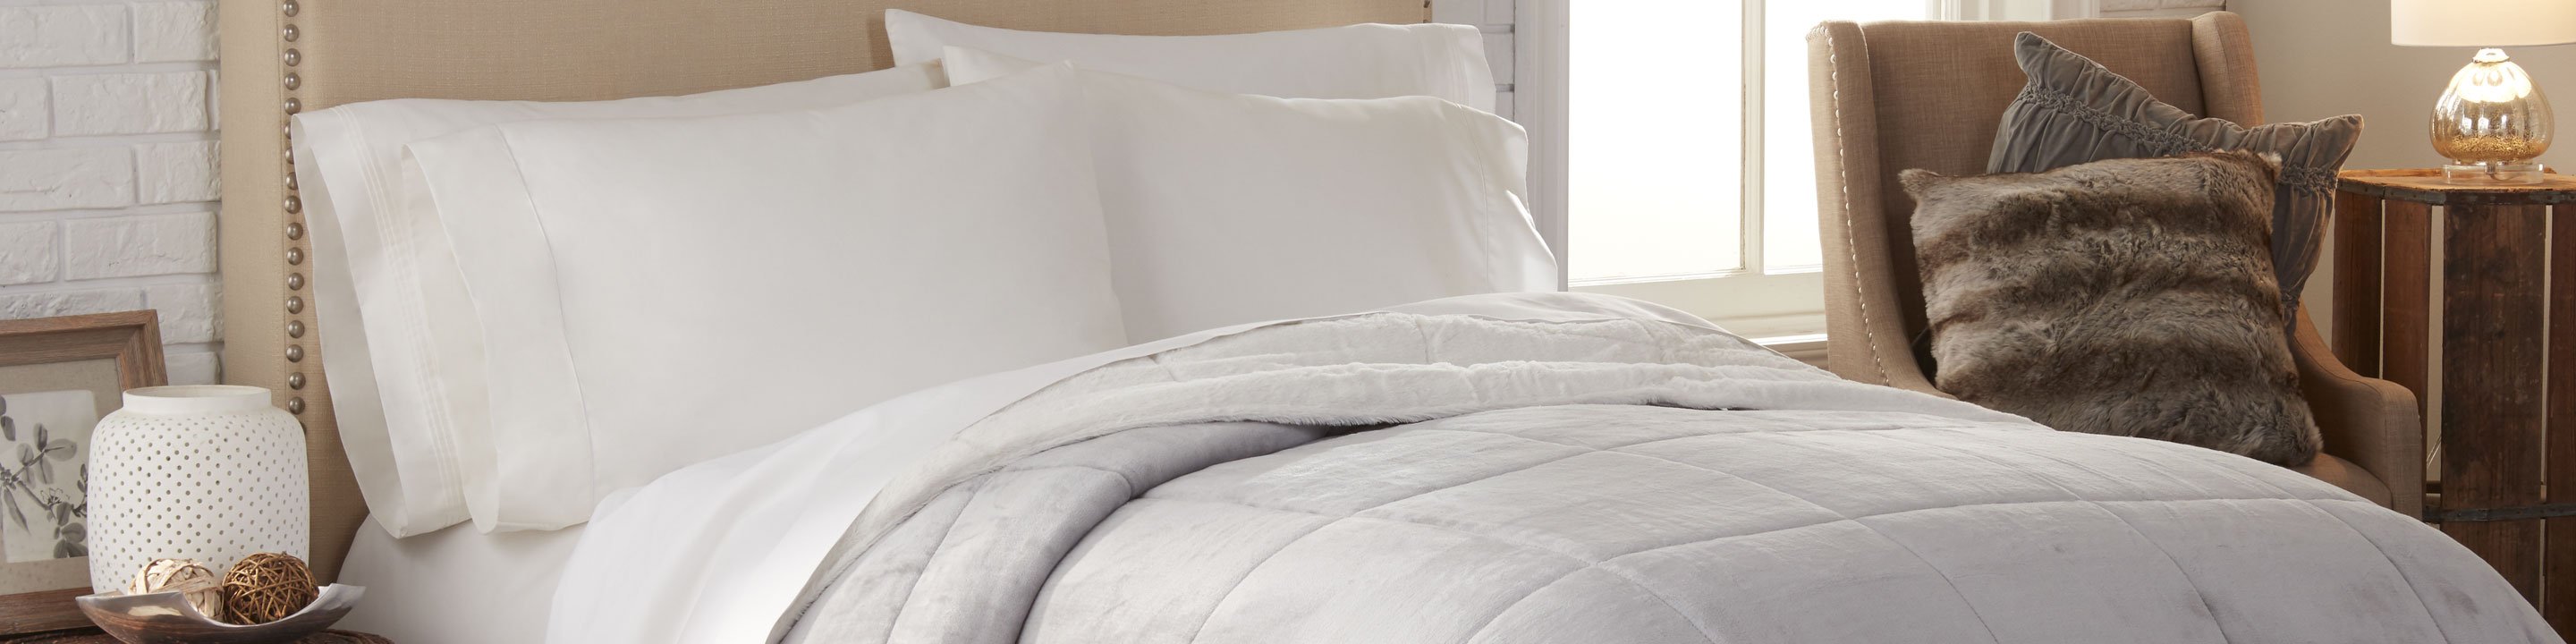 Bedding Duvet Covers And Pillows Tuesday Morning